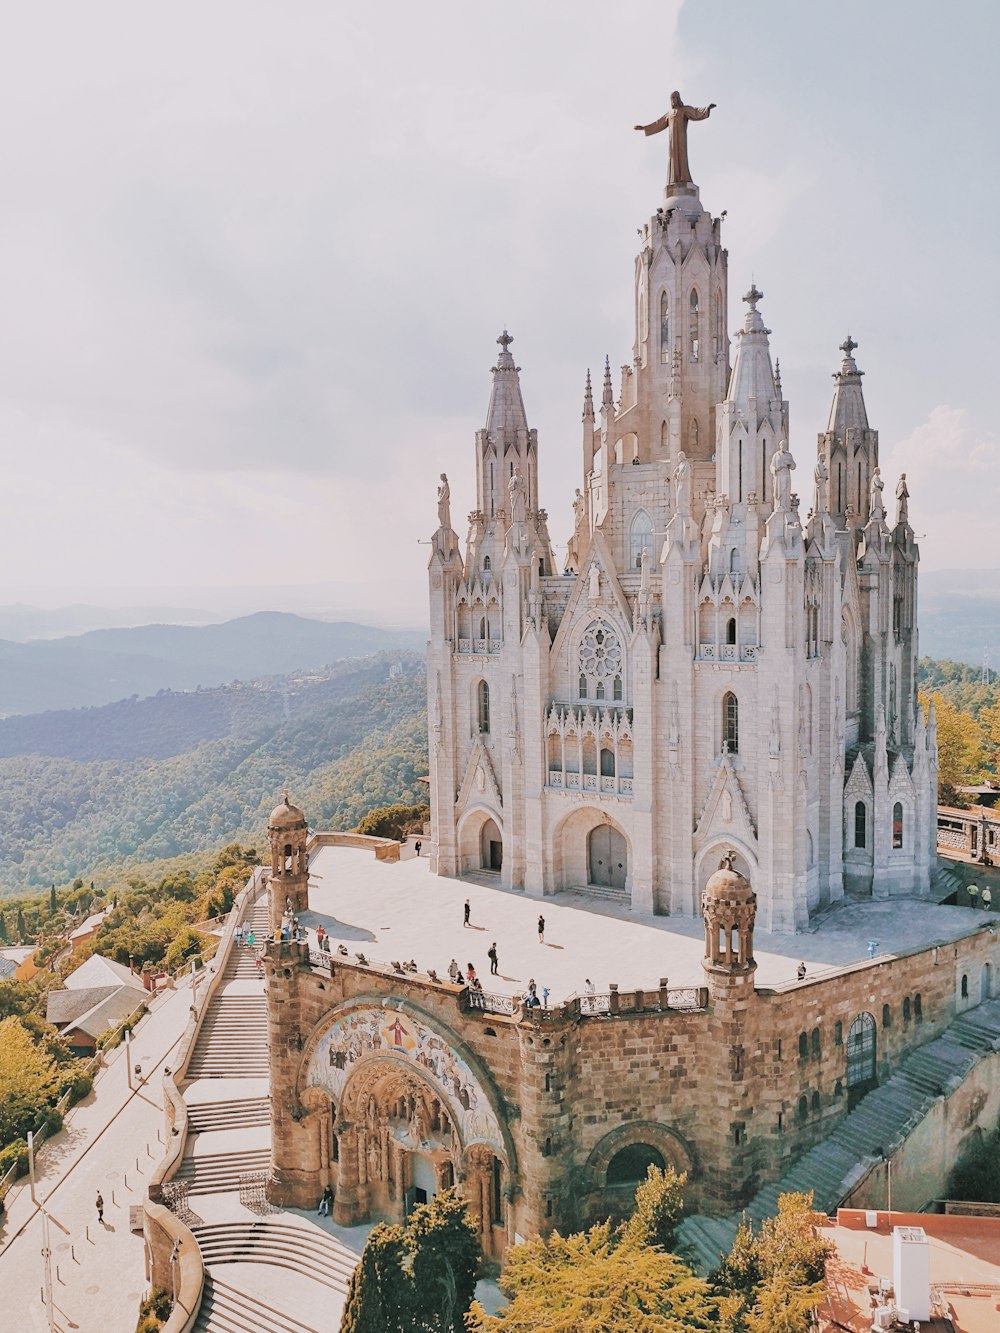 27+ Beautiful Spain Pictures | Download Free Images on Unsplash